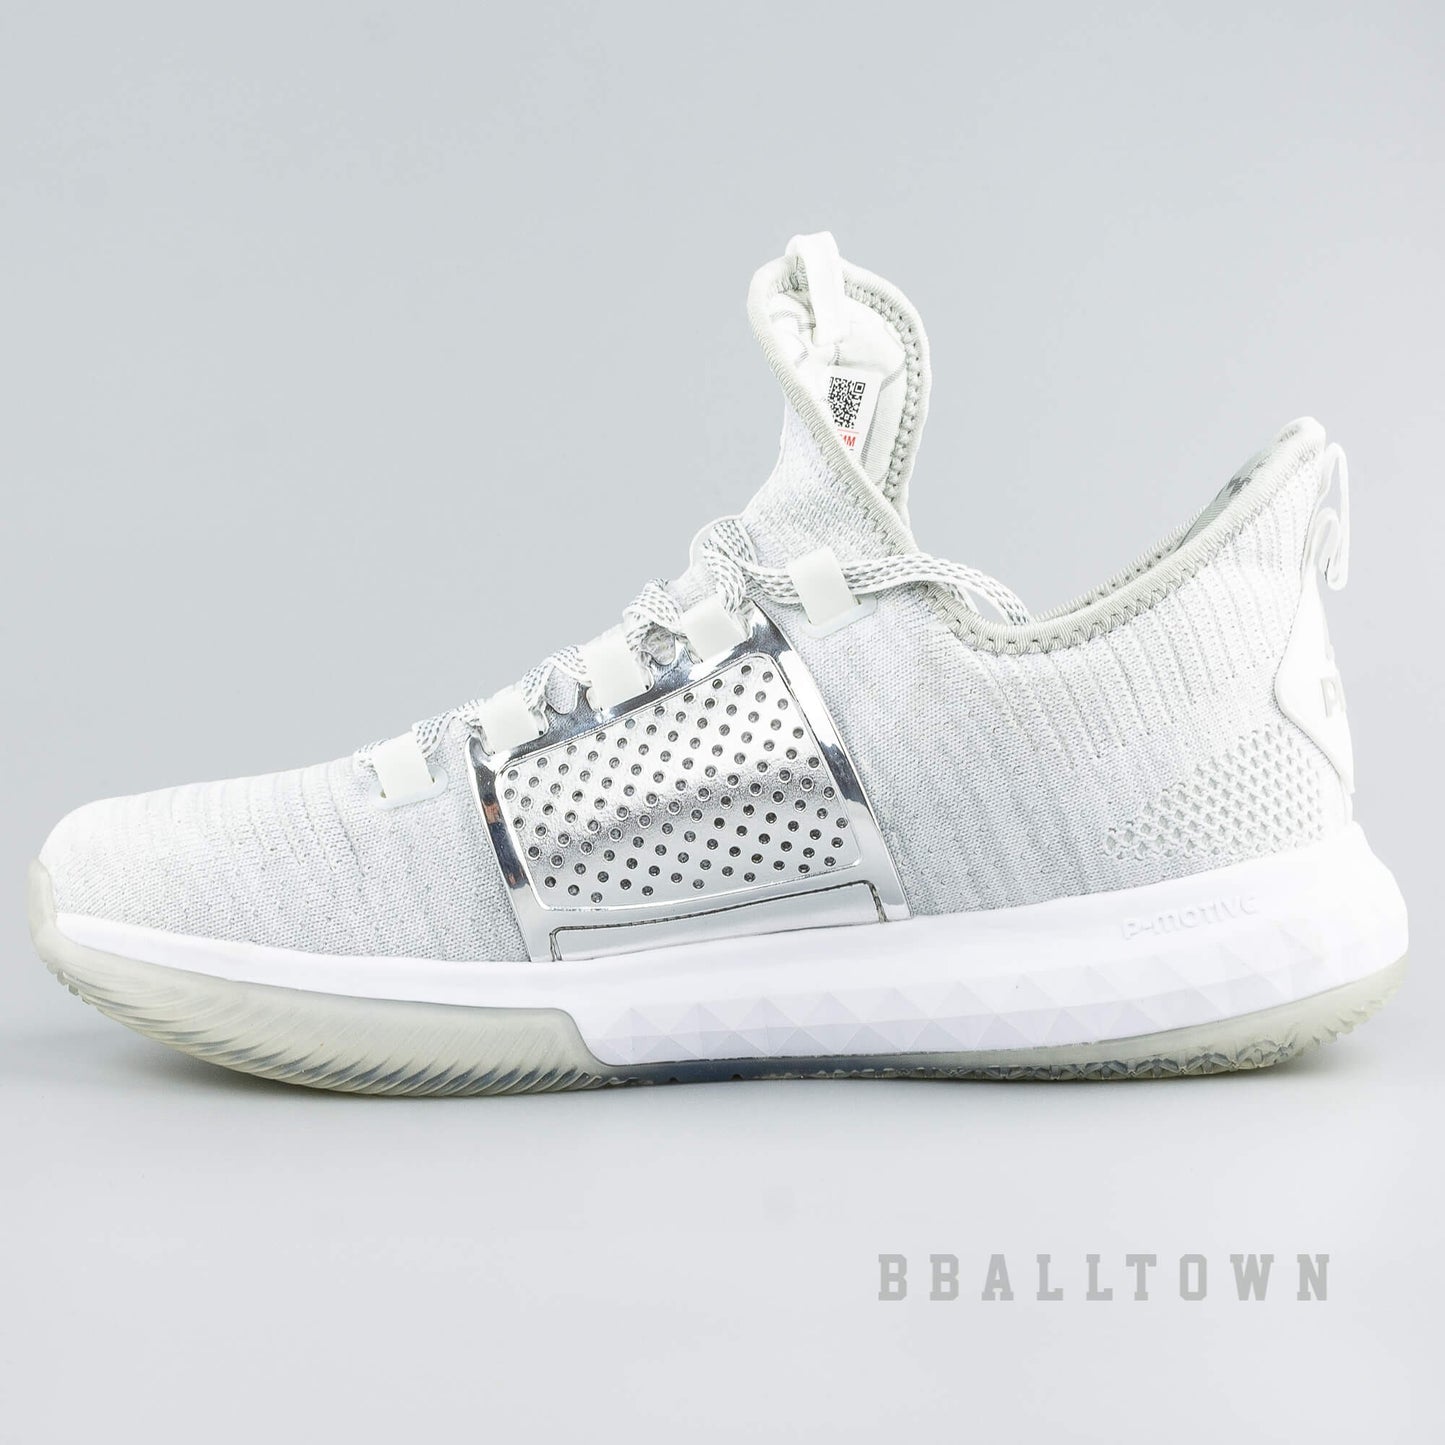 Peak Basketball Shoes Dwight Howard DH3 Low White